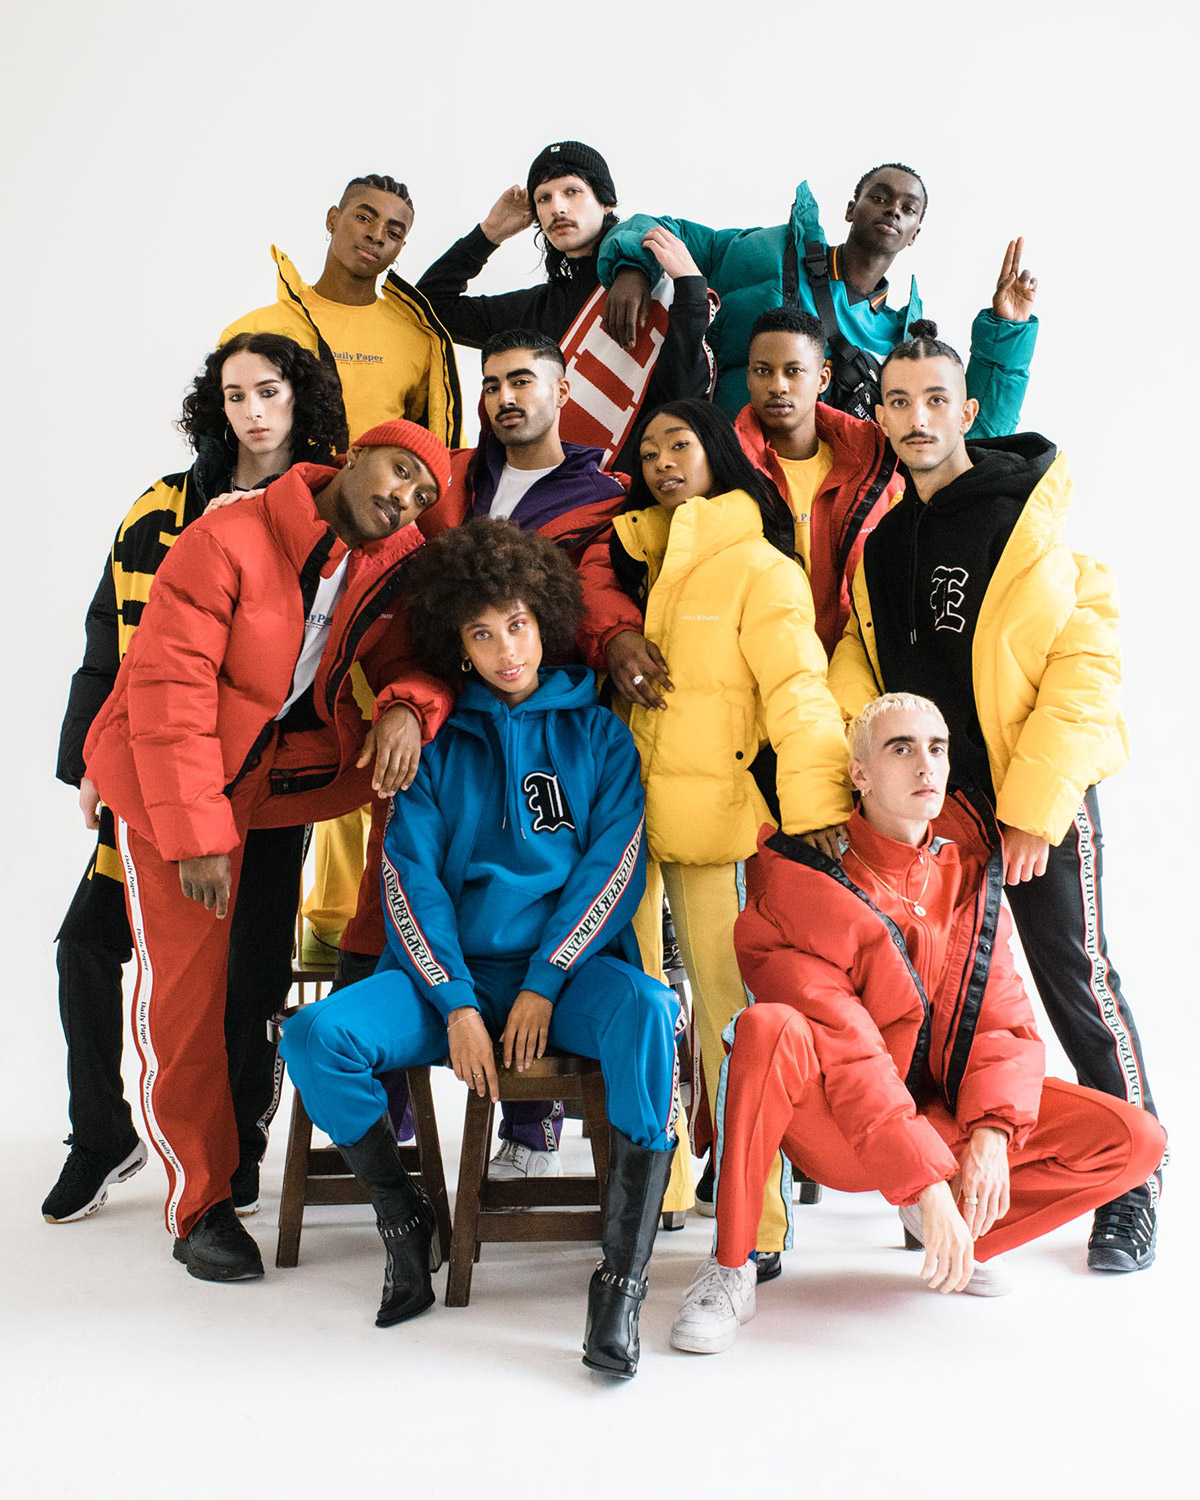 Over 30 London-based creators feature in Daily Paper’s F/W 2018 UNITE campaign, made in partnership with FGUK Magazine.